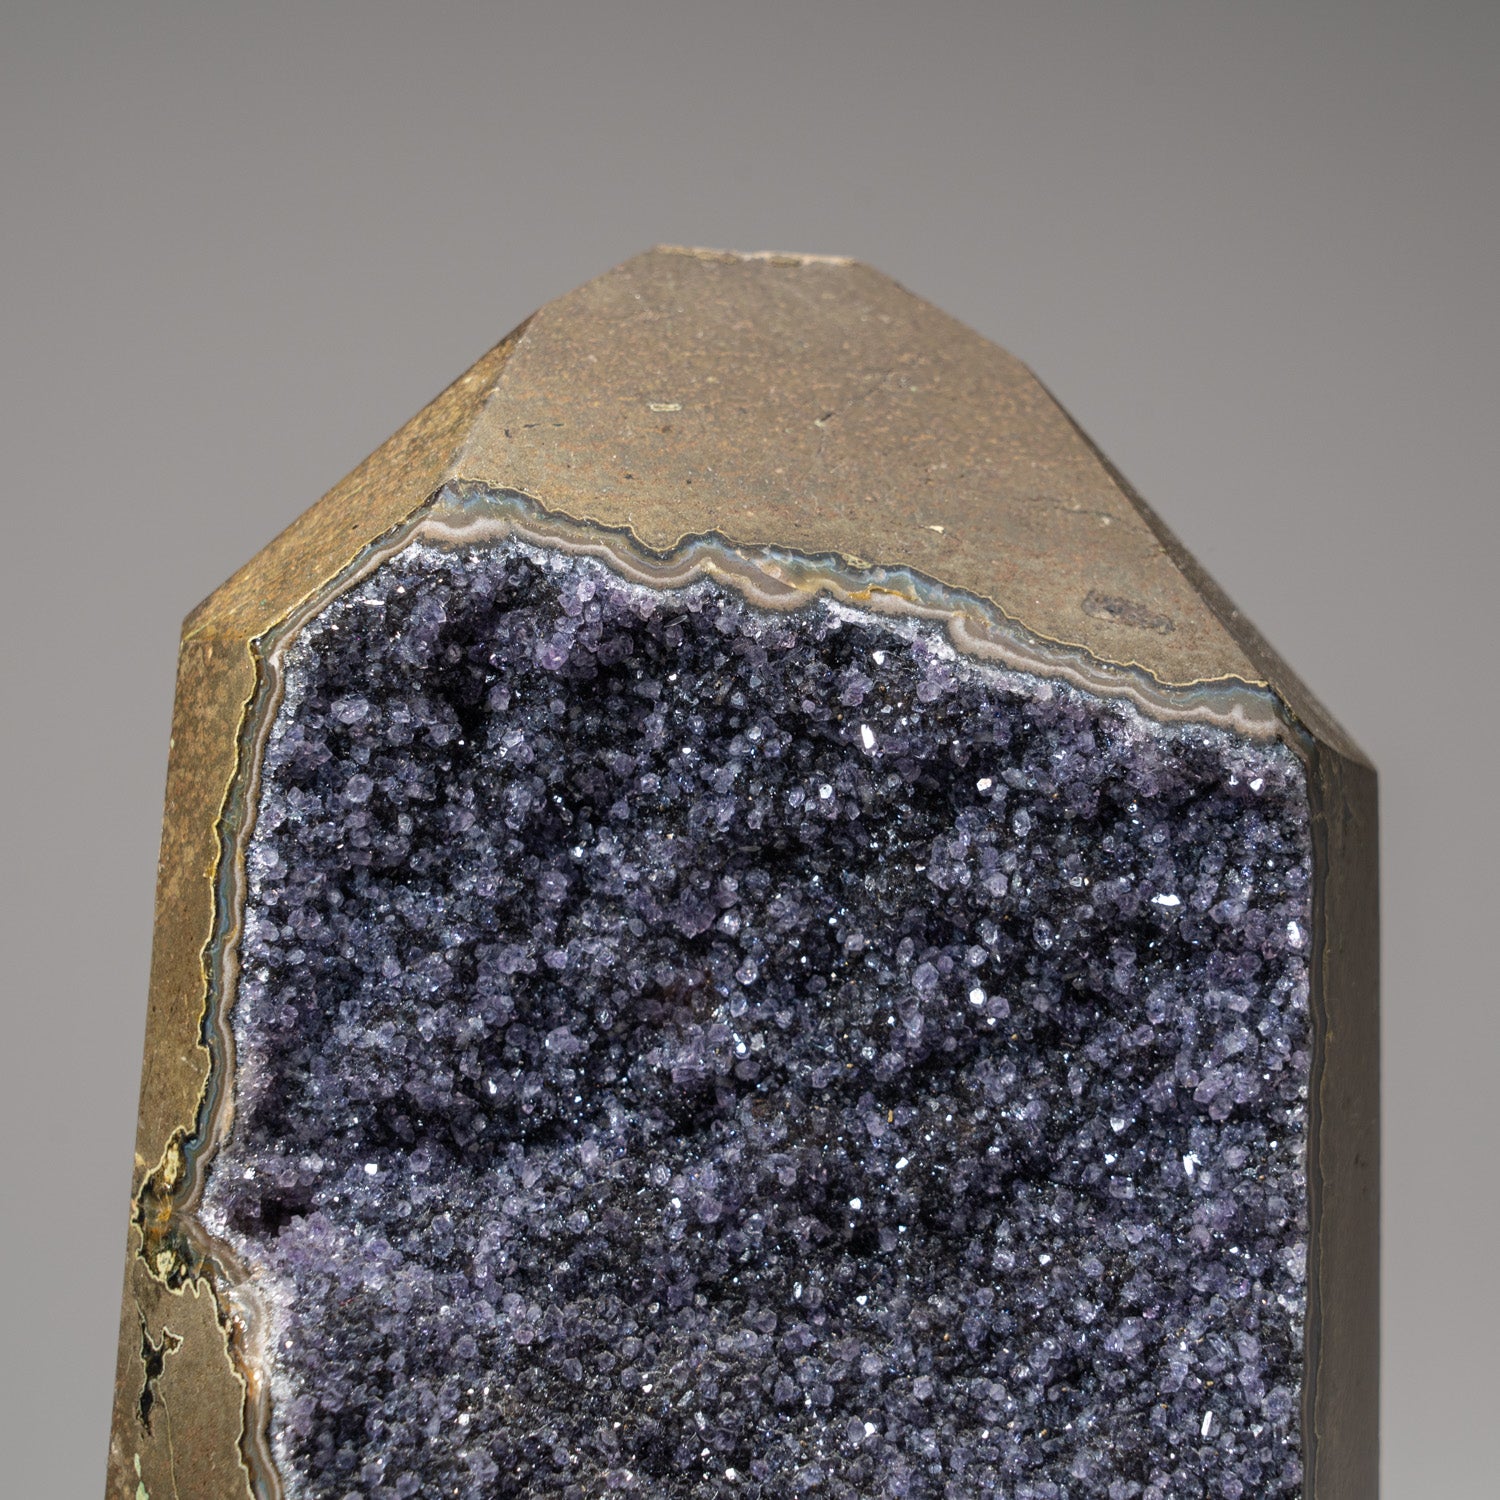 Genuine Polished Amethyst Crystal Geode Point From Brazil (4.5 lbs)